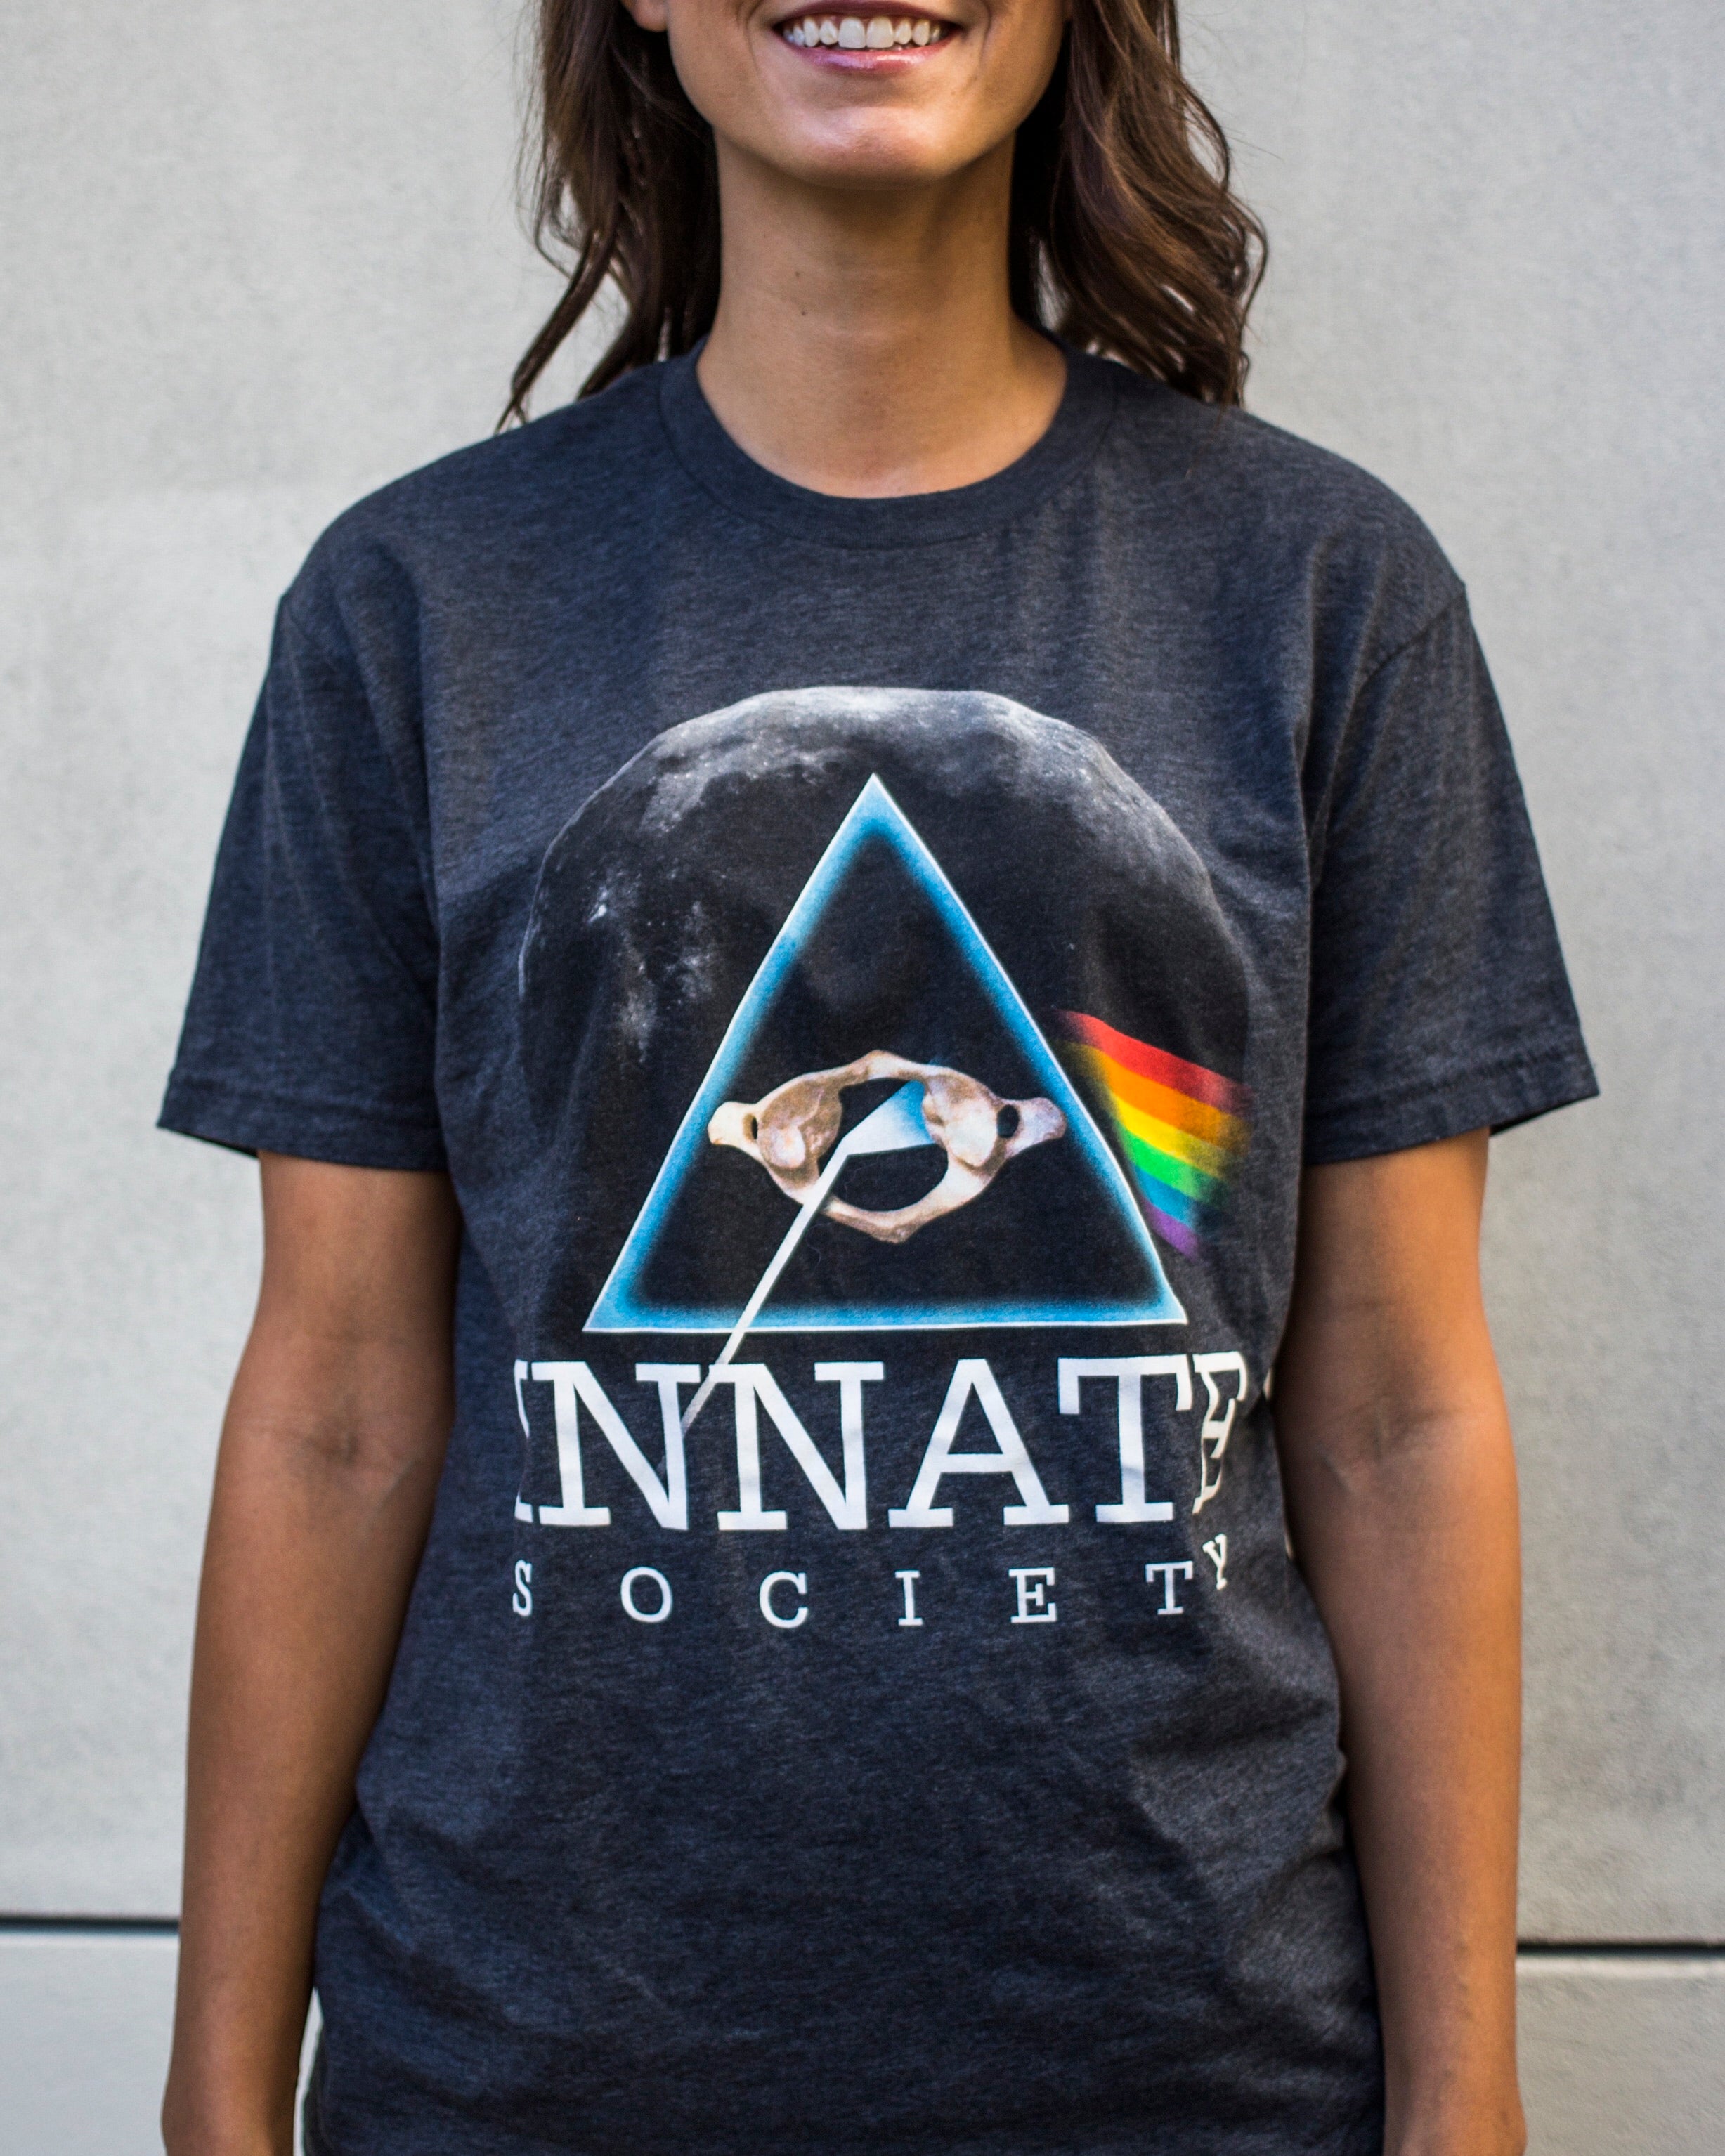 Prism T-Shirt in Charcoal Grey